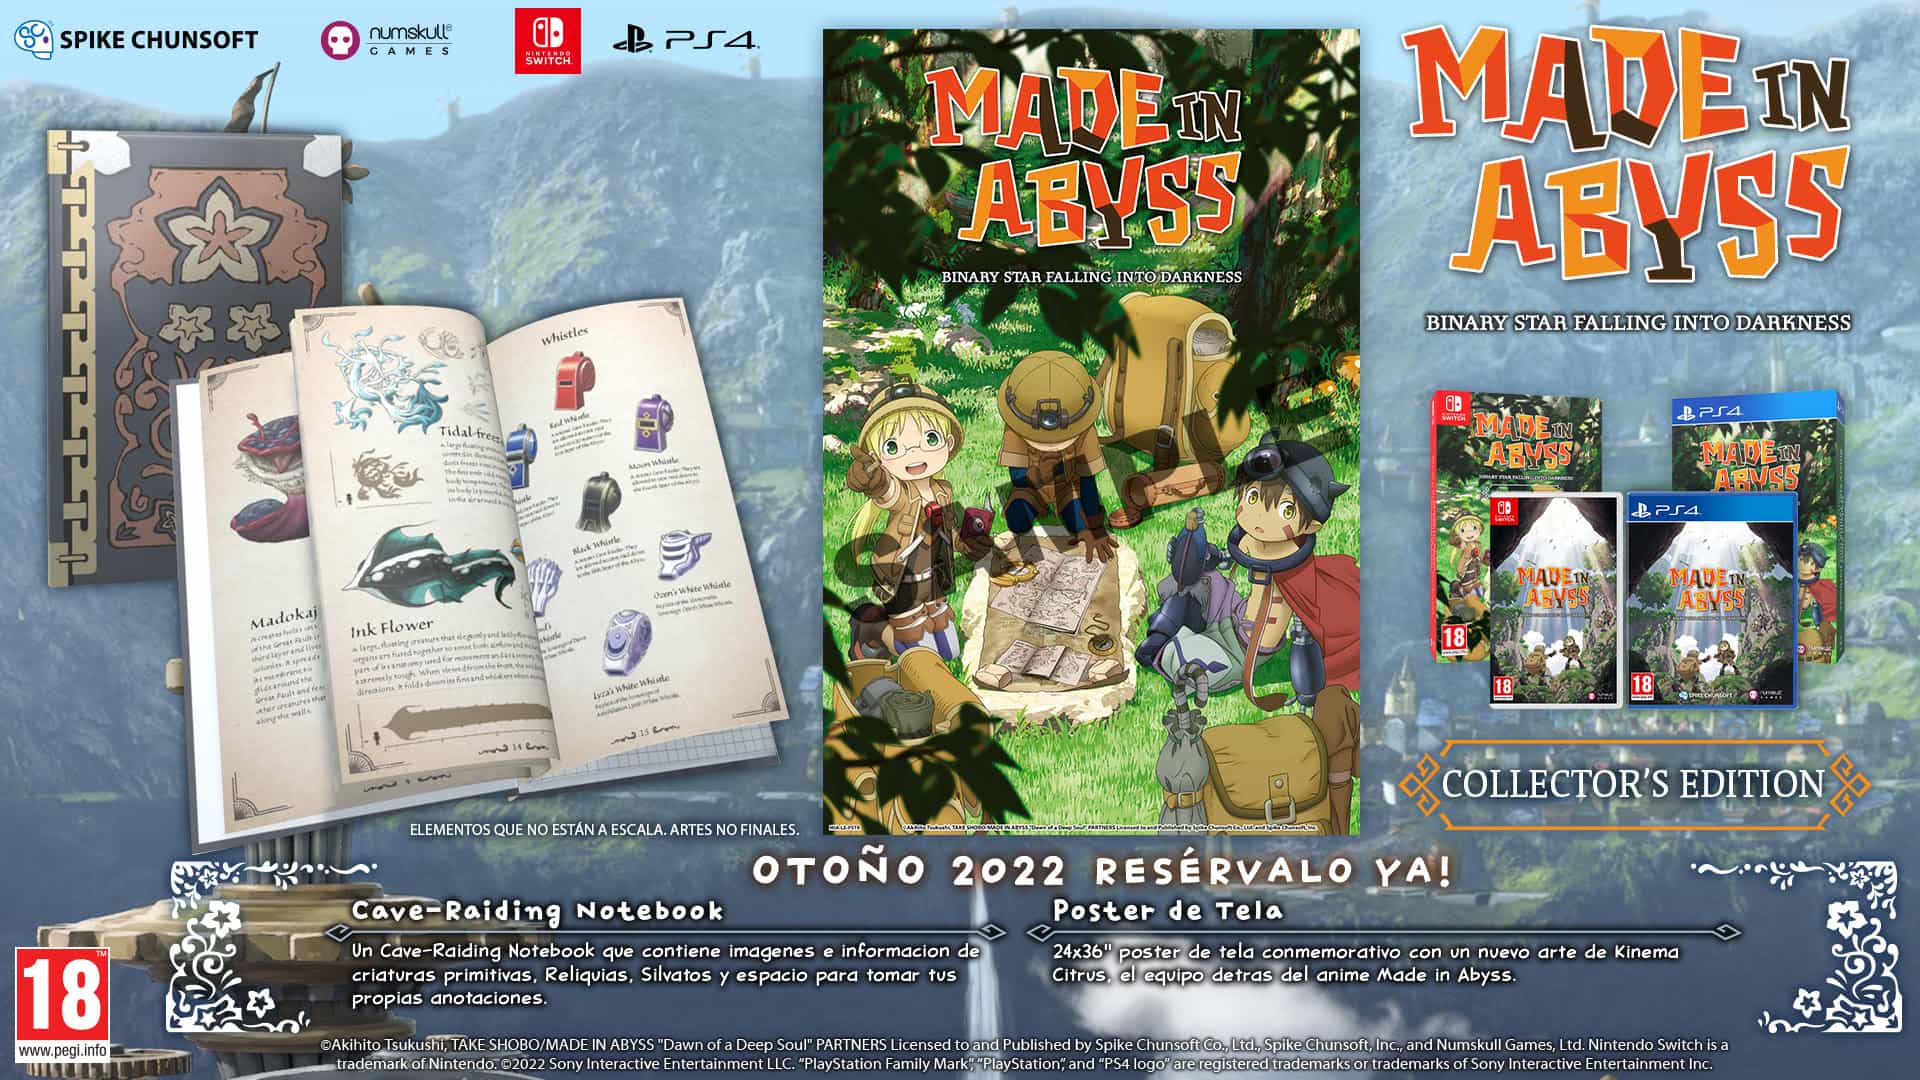 Made in abyss game